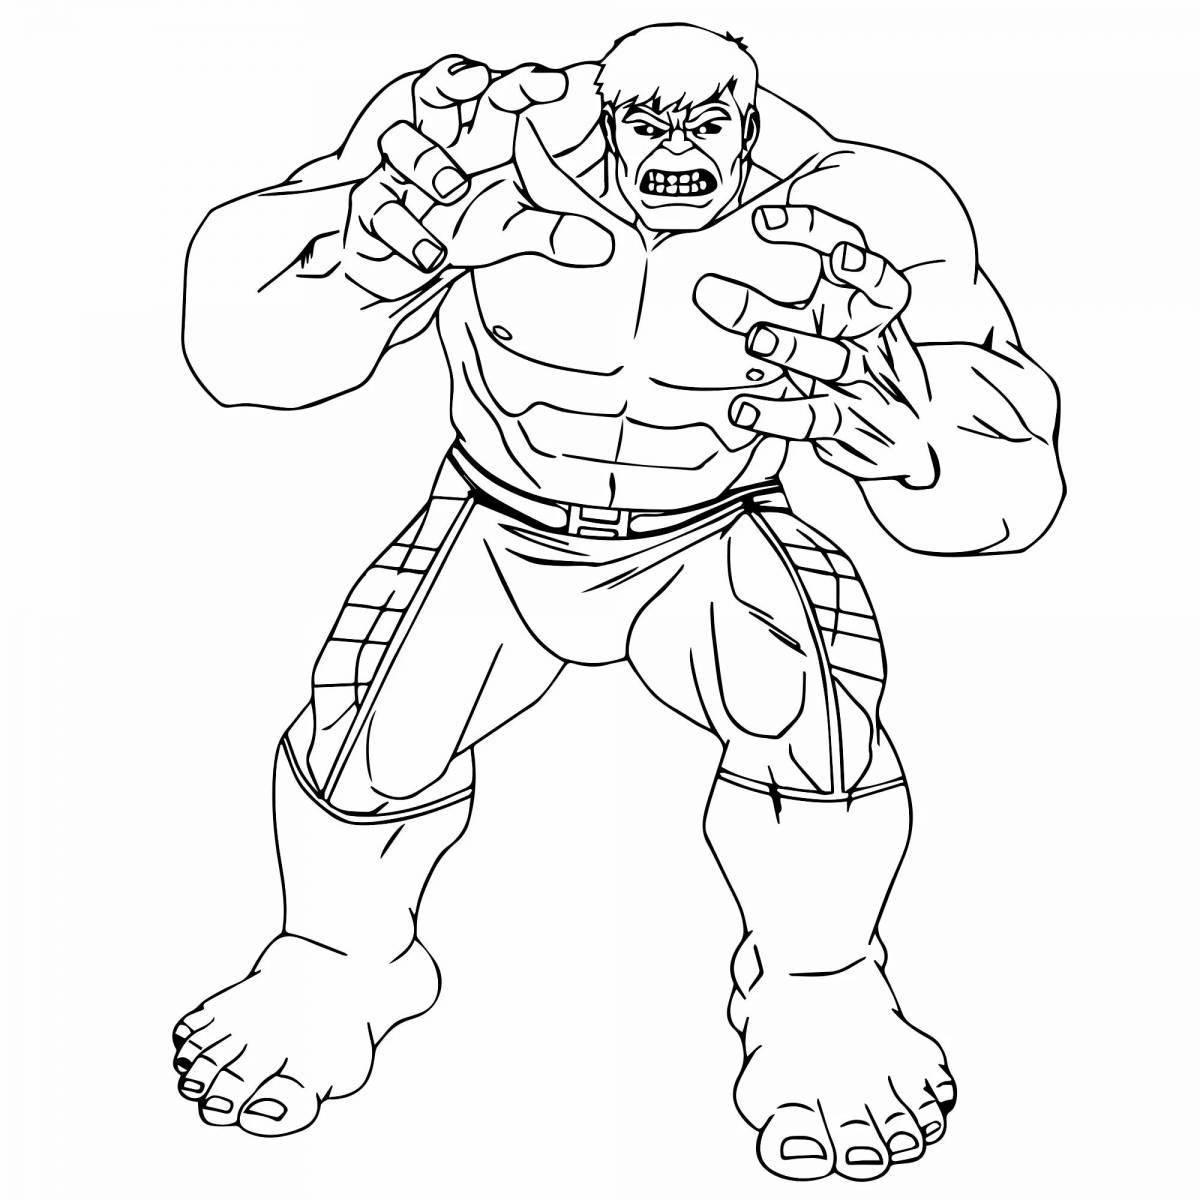 Gorgeous Hulk Coloring Page for 6-7 year olds